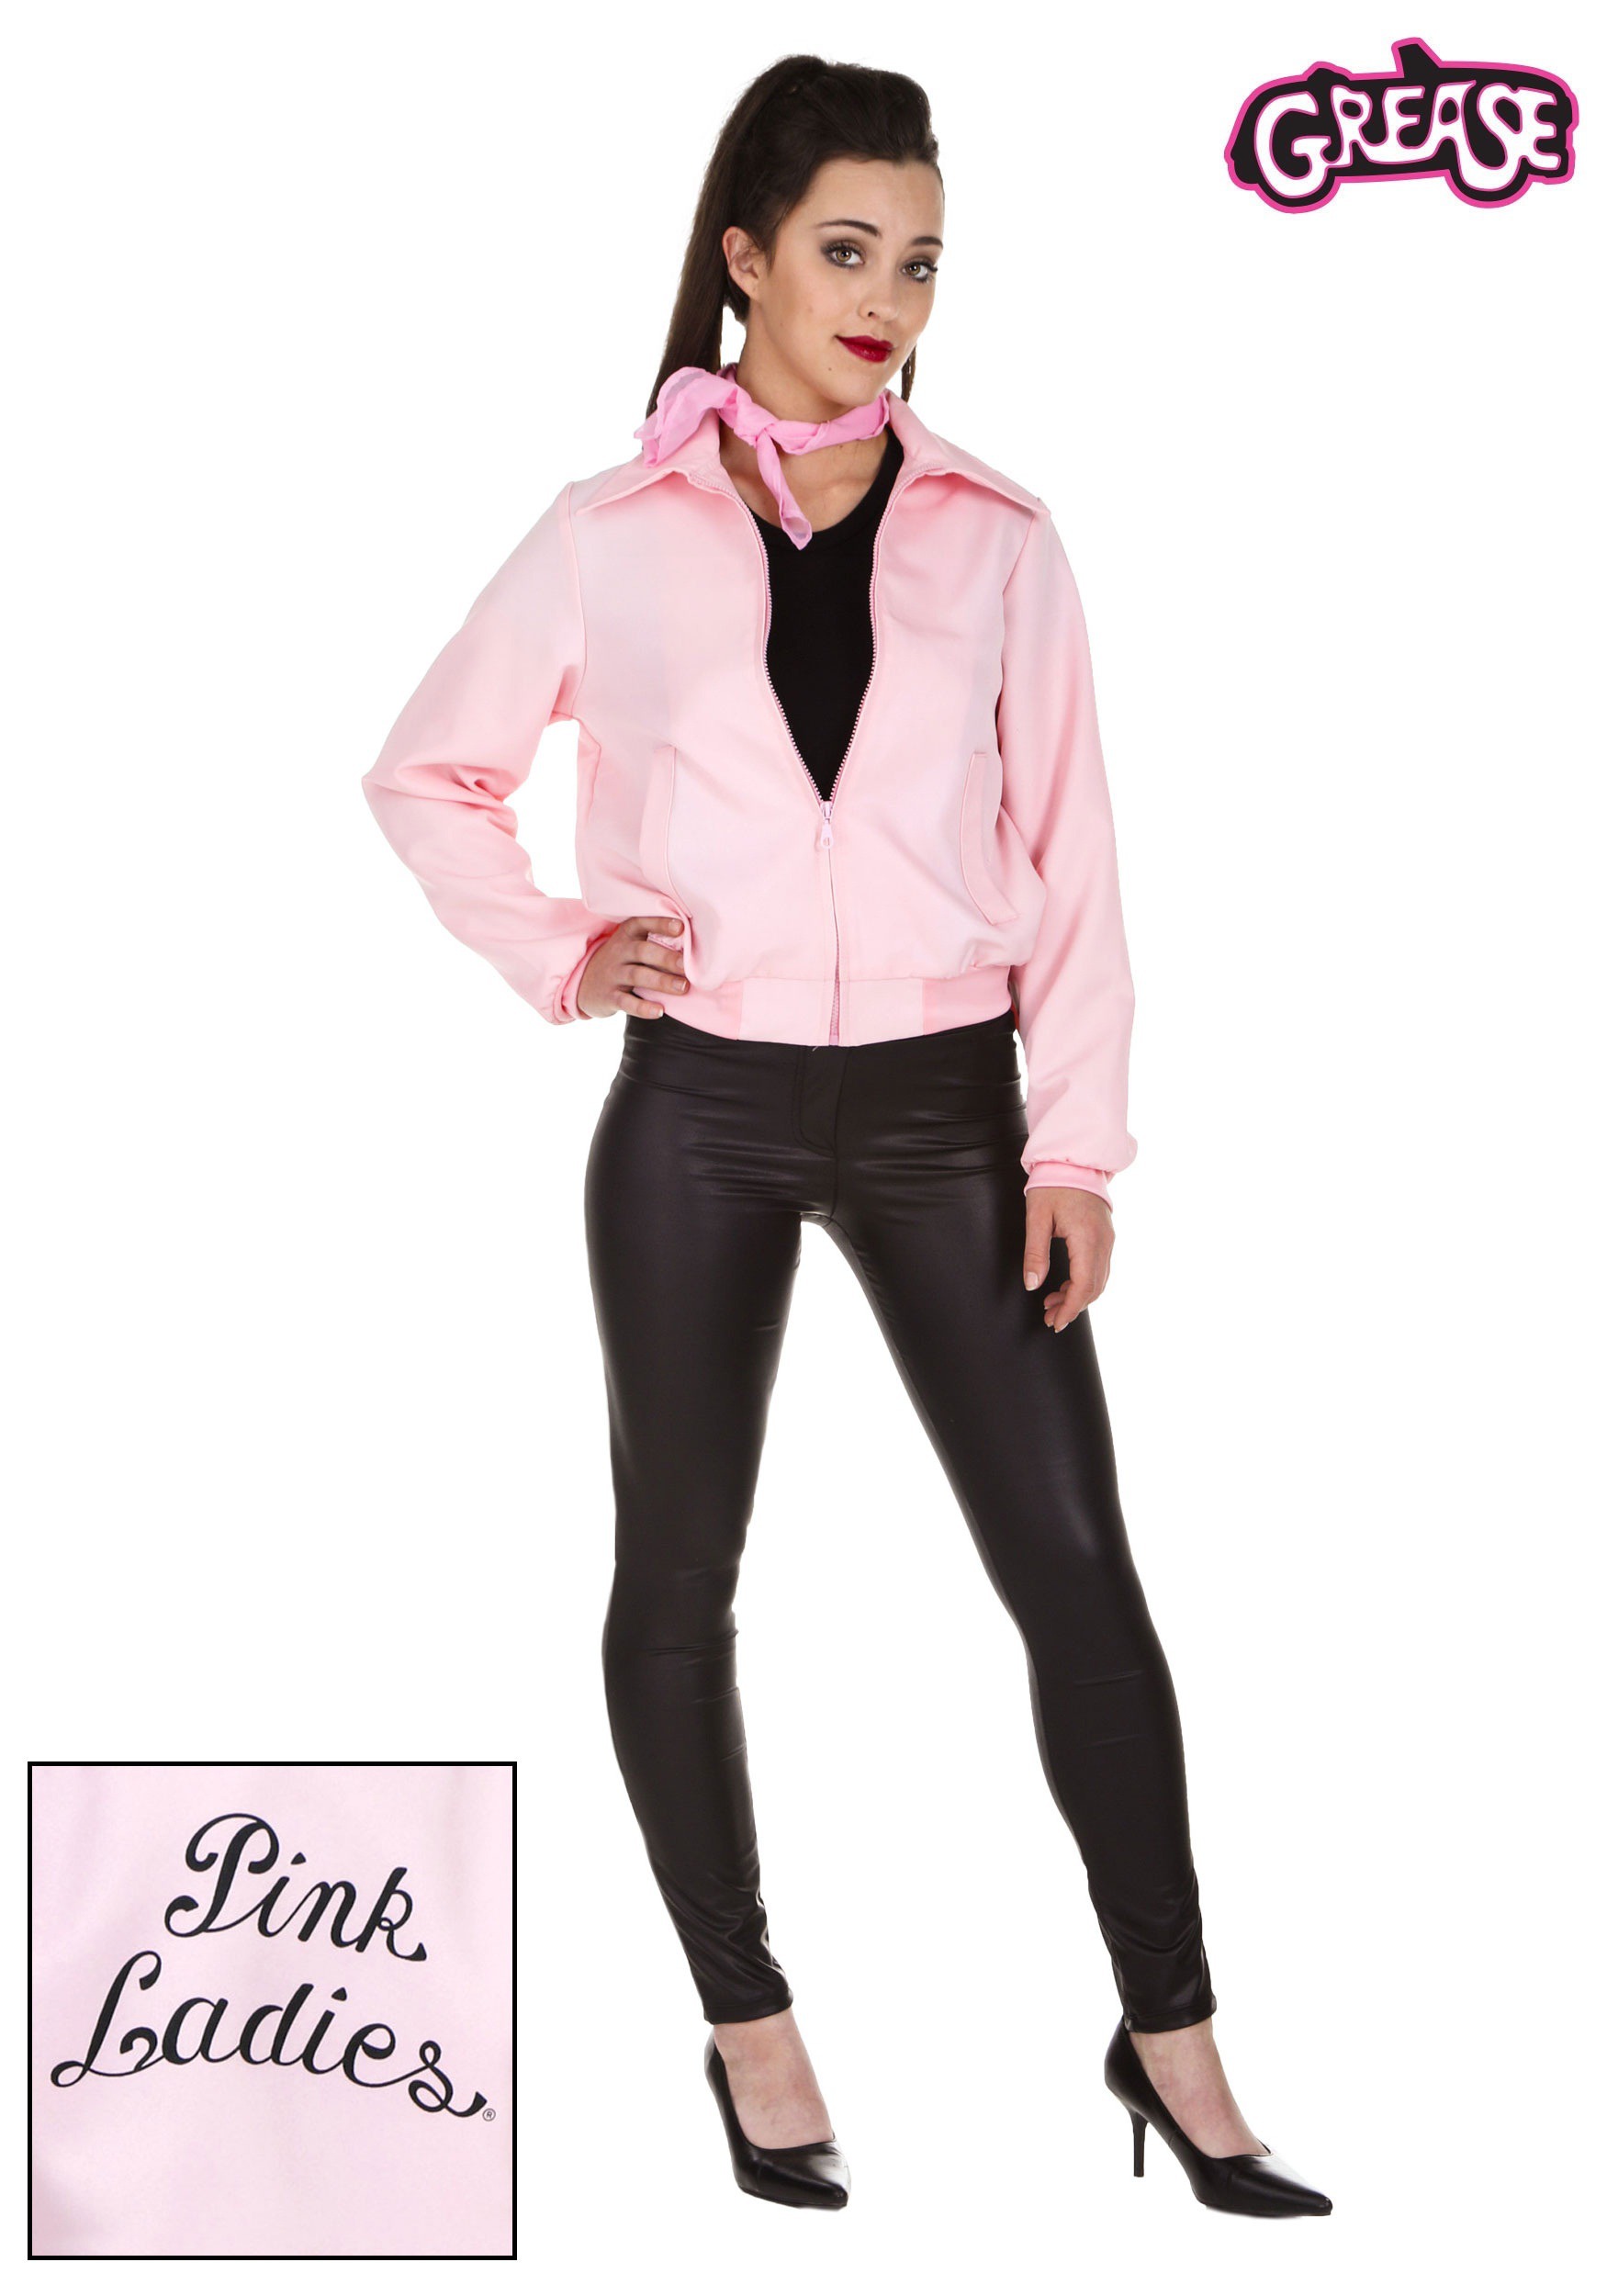 https://images.fun.com/products/34435/1-1/deluxe-pink-ladies-womens-jacket.jpg